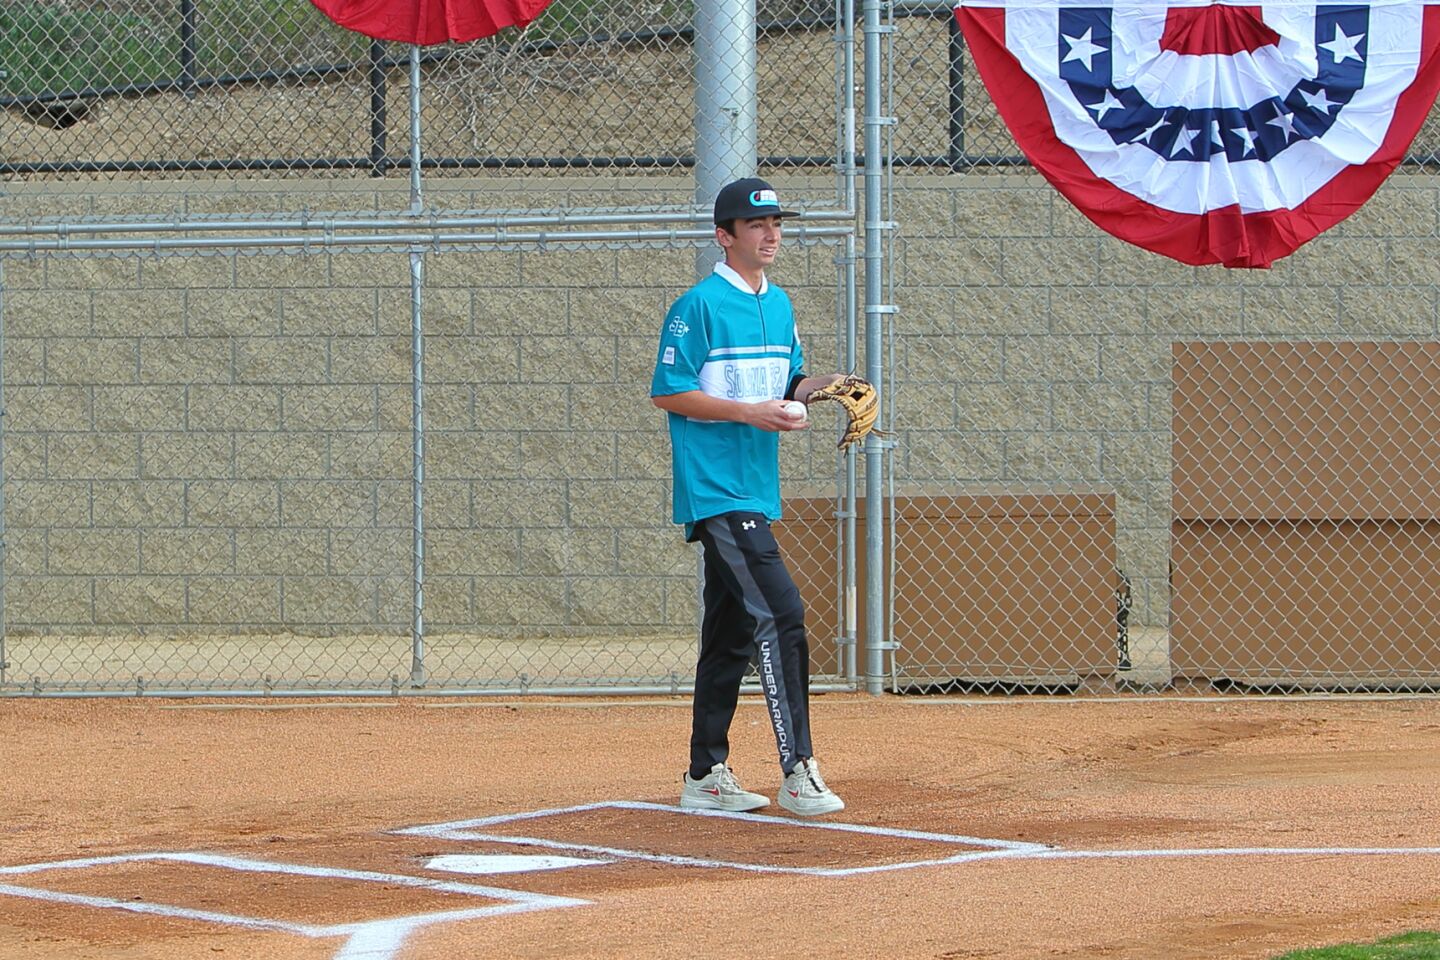 Jake Price was on hand to catch the first pitch